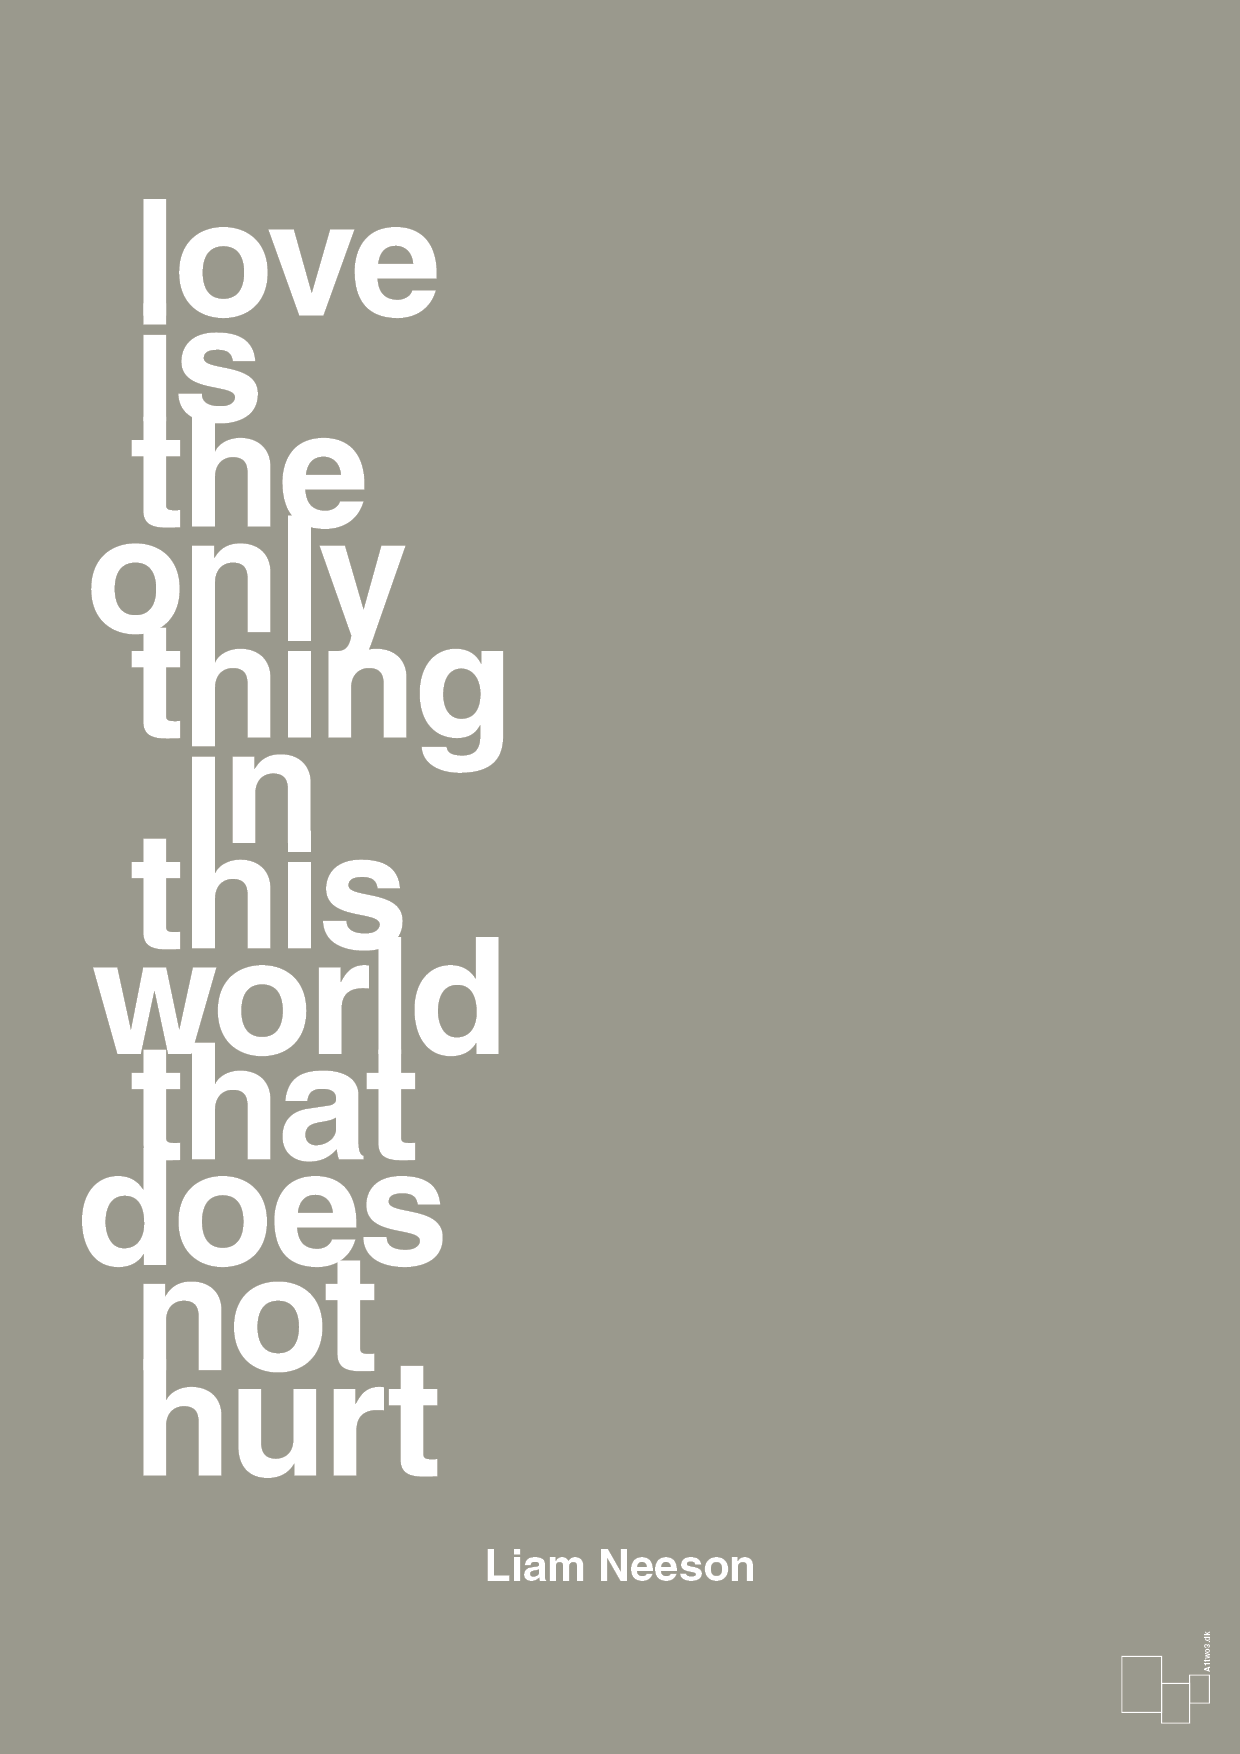 love is the only thing in this world that does not hurt - Plakat med Citater i Battleship Gray